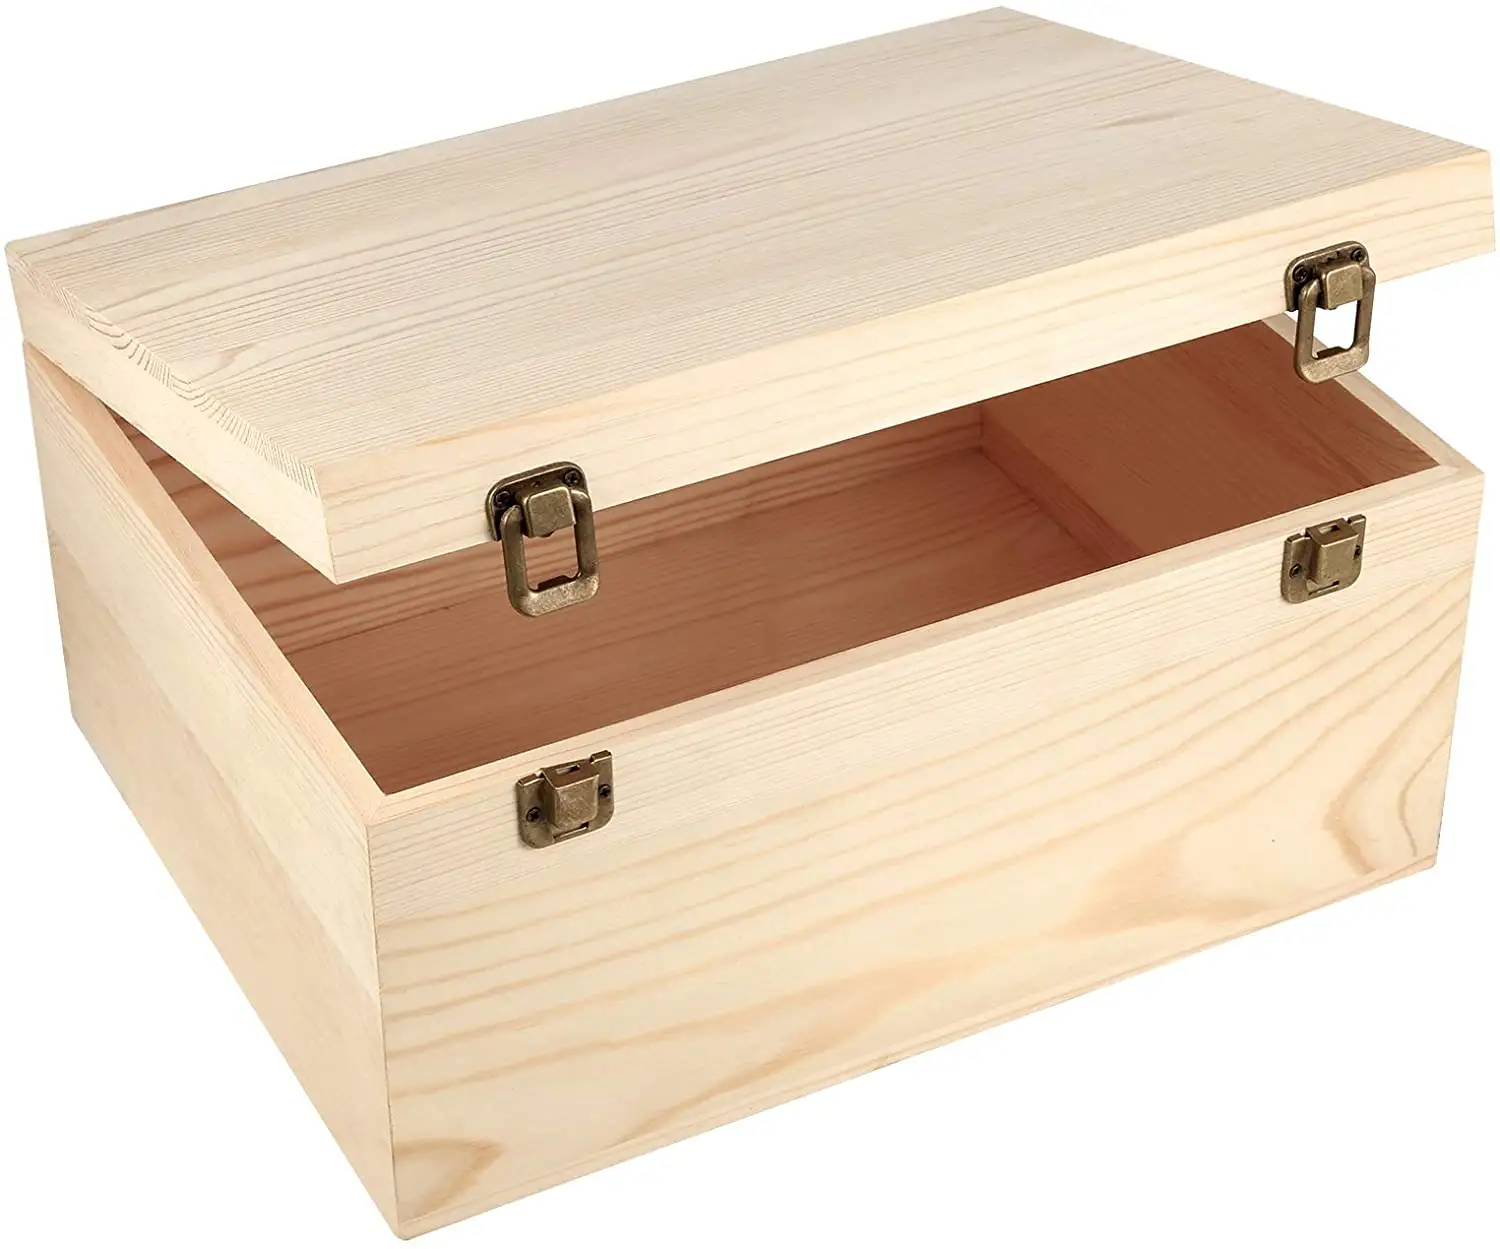 Unfinished Wood Box with Hinged Lid Decorate Wooden Boxes